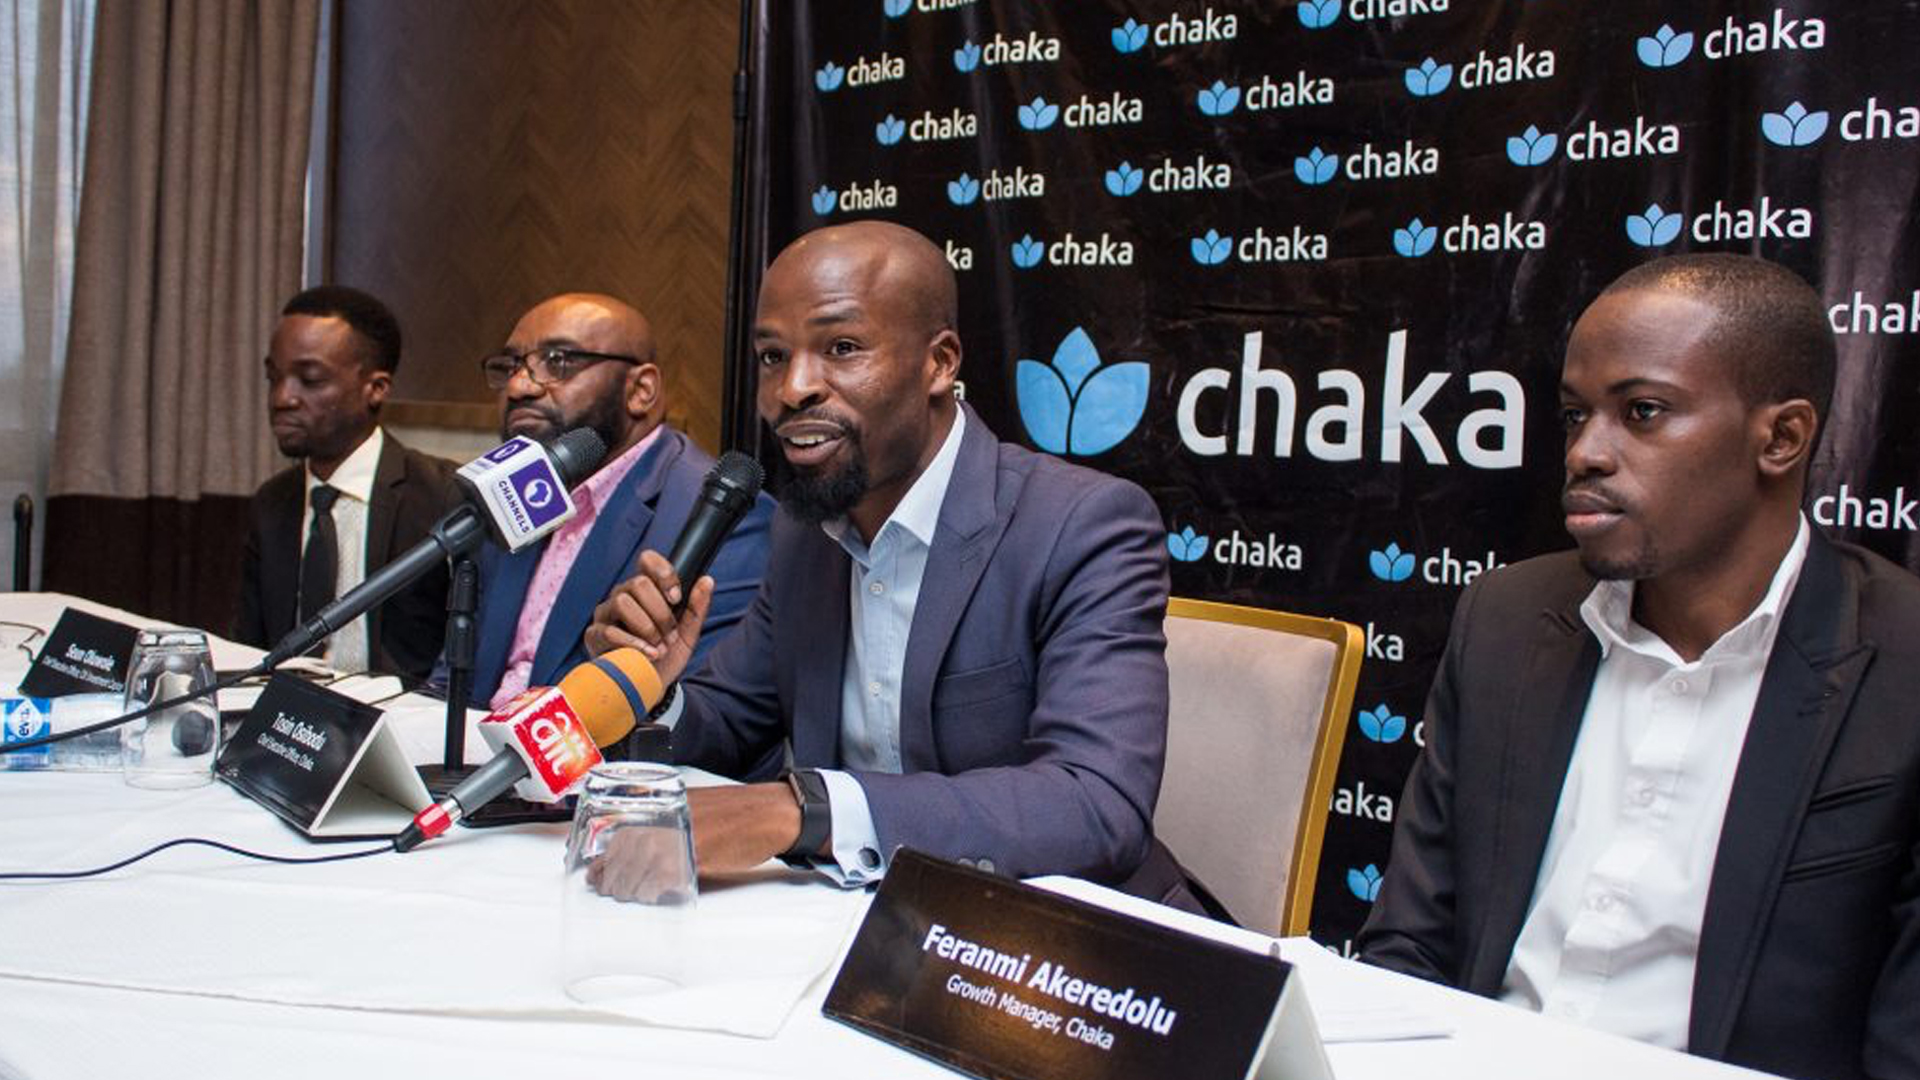 Nigerian Investment Platform Chaka Secures $1.5M In Pre-Seed Funding And Obtains Country's First SEC License